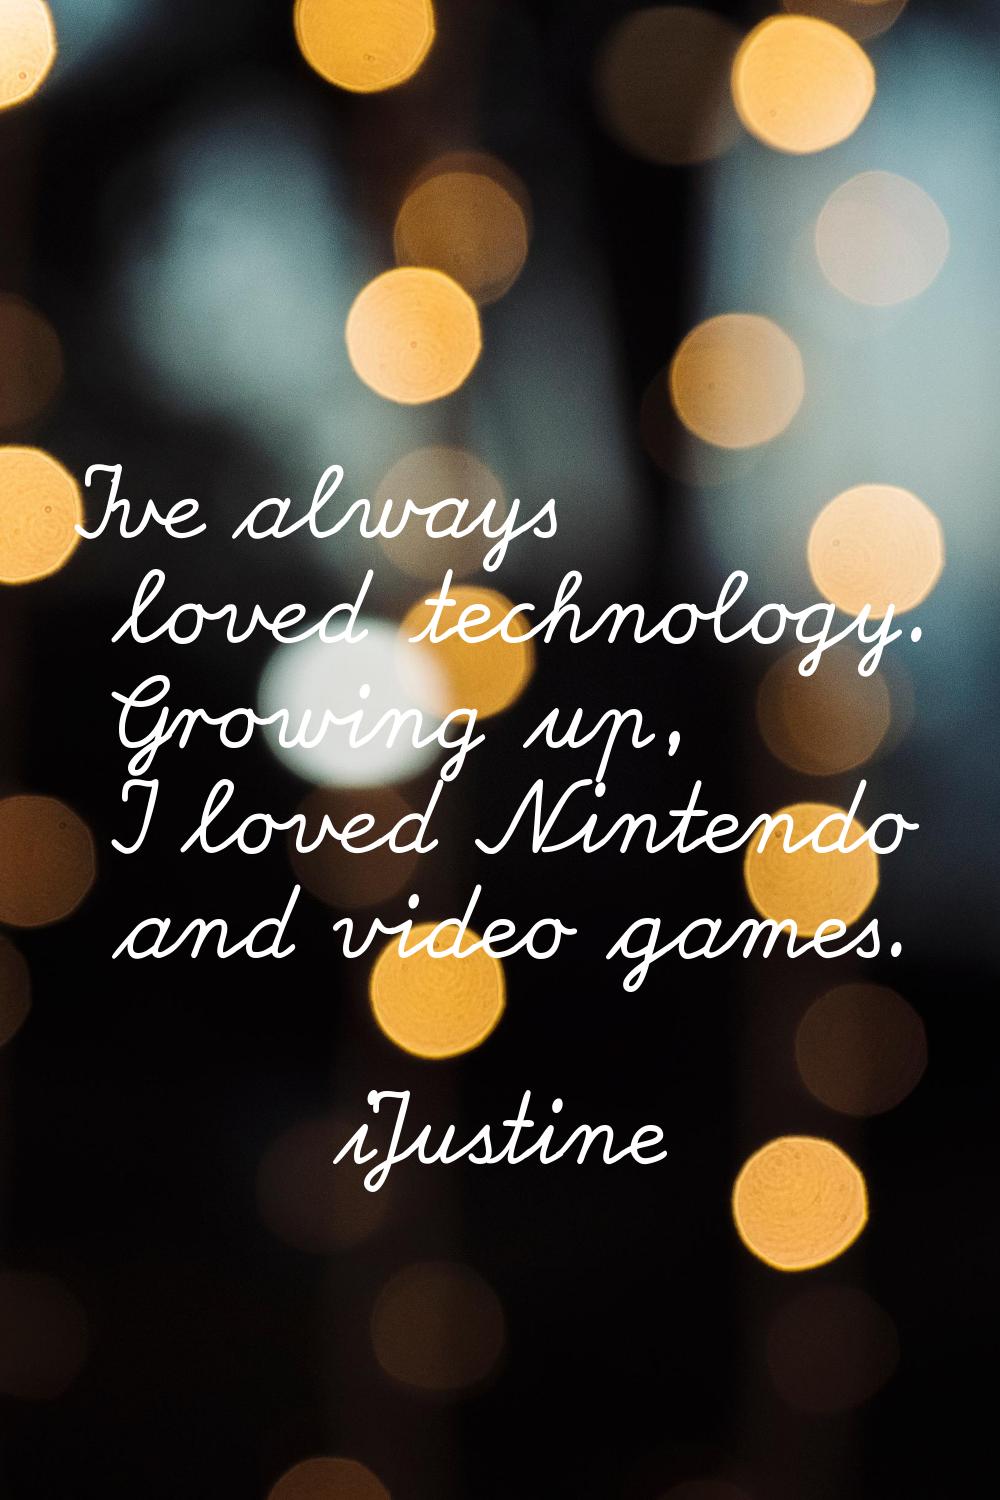 I've always loved technology. Growing up, I loved Nintendo and video games.